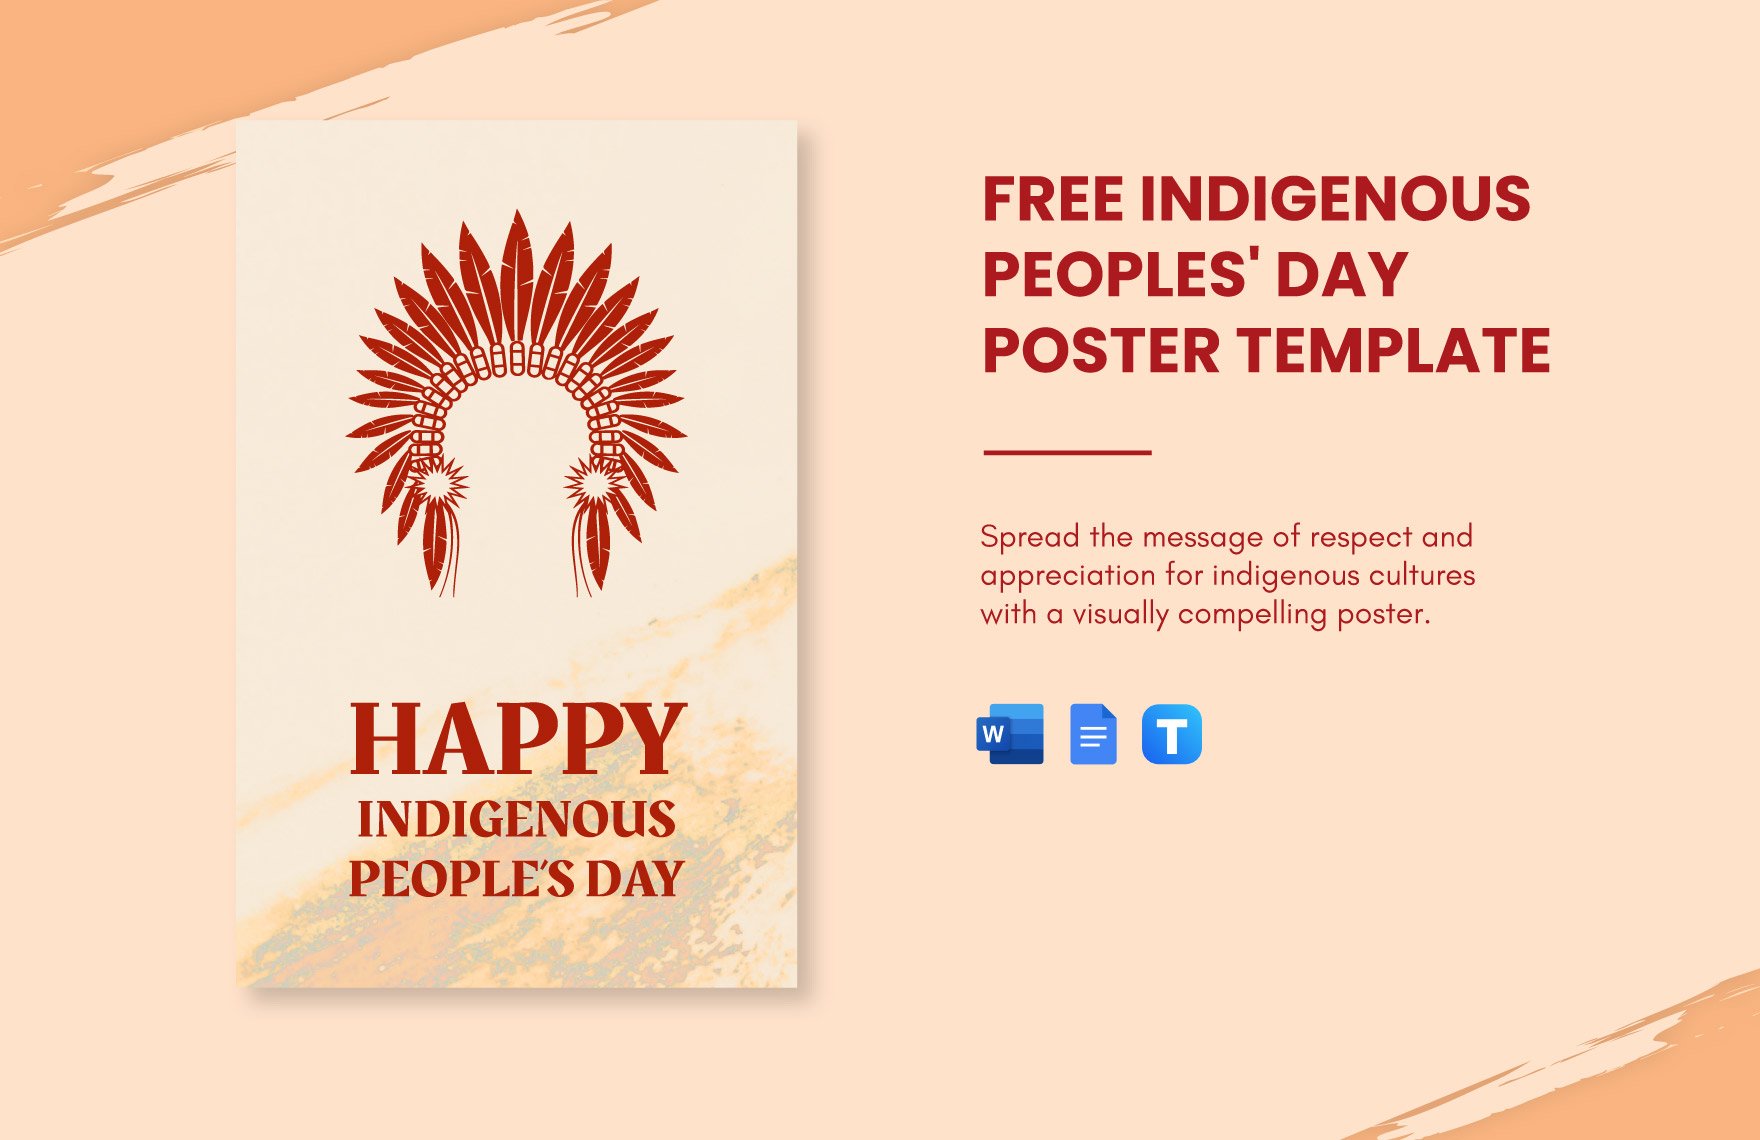 Free Indigenous Peoples' Day Poster Template